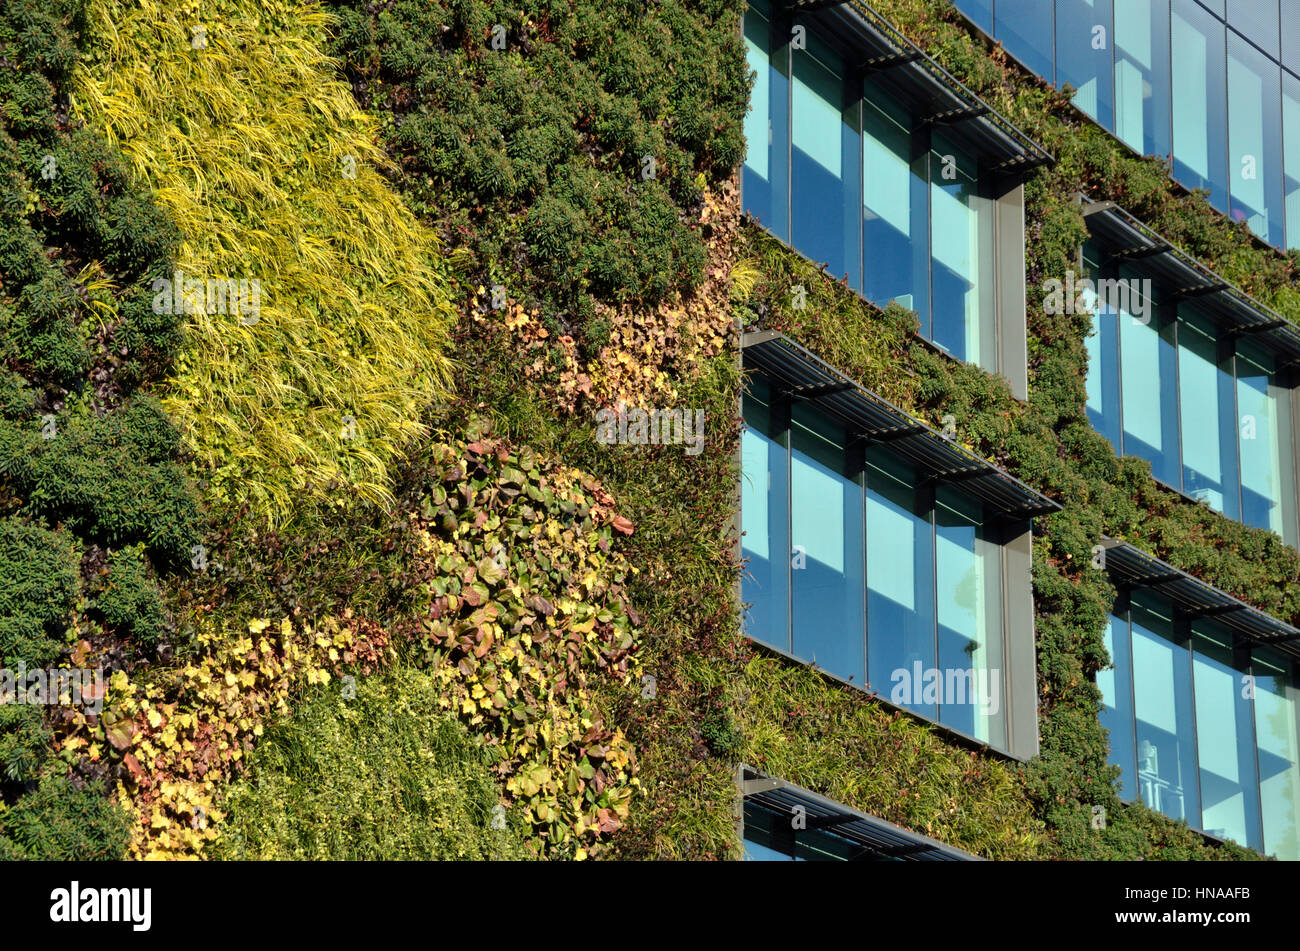 Office building covered with green plants Stock Photo